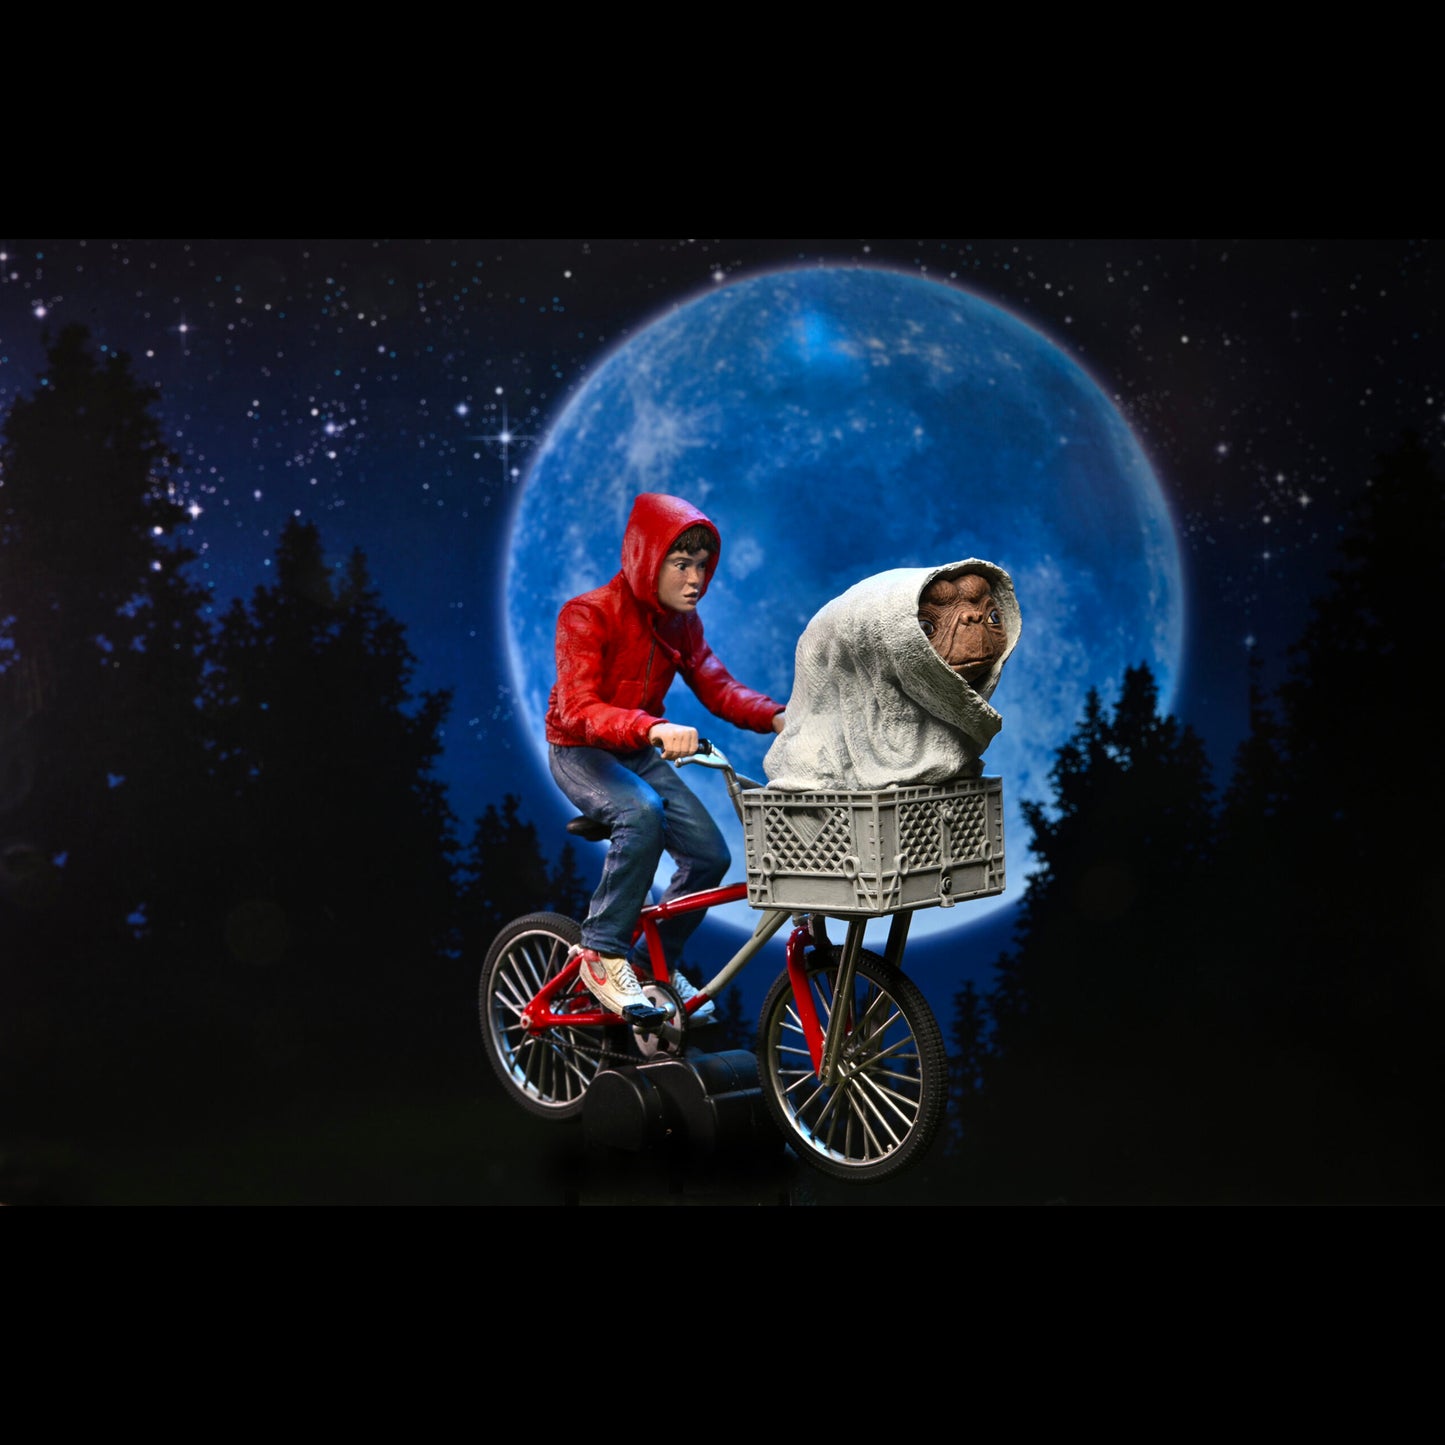 NECA: E.T. - Elliot & E.T. on Bicycle 7" Tall Action Figure